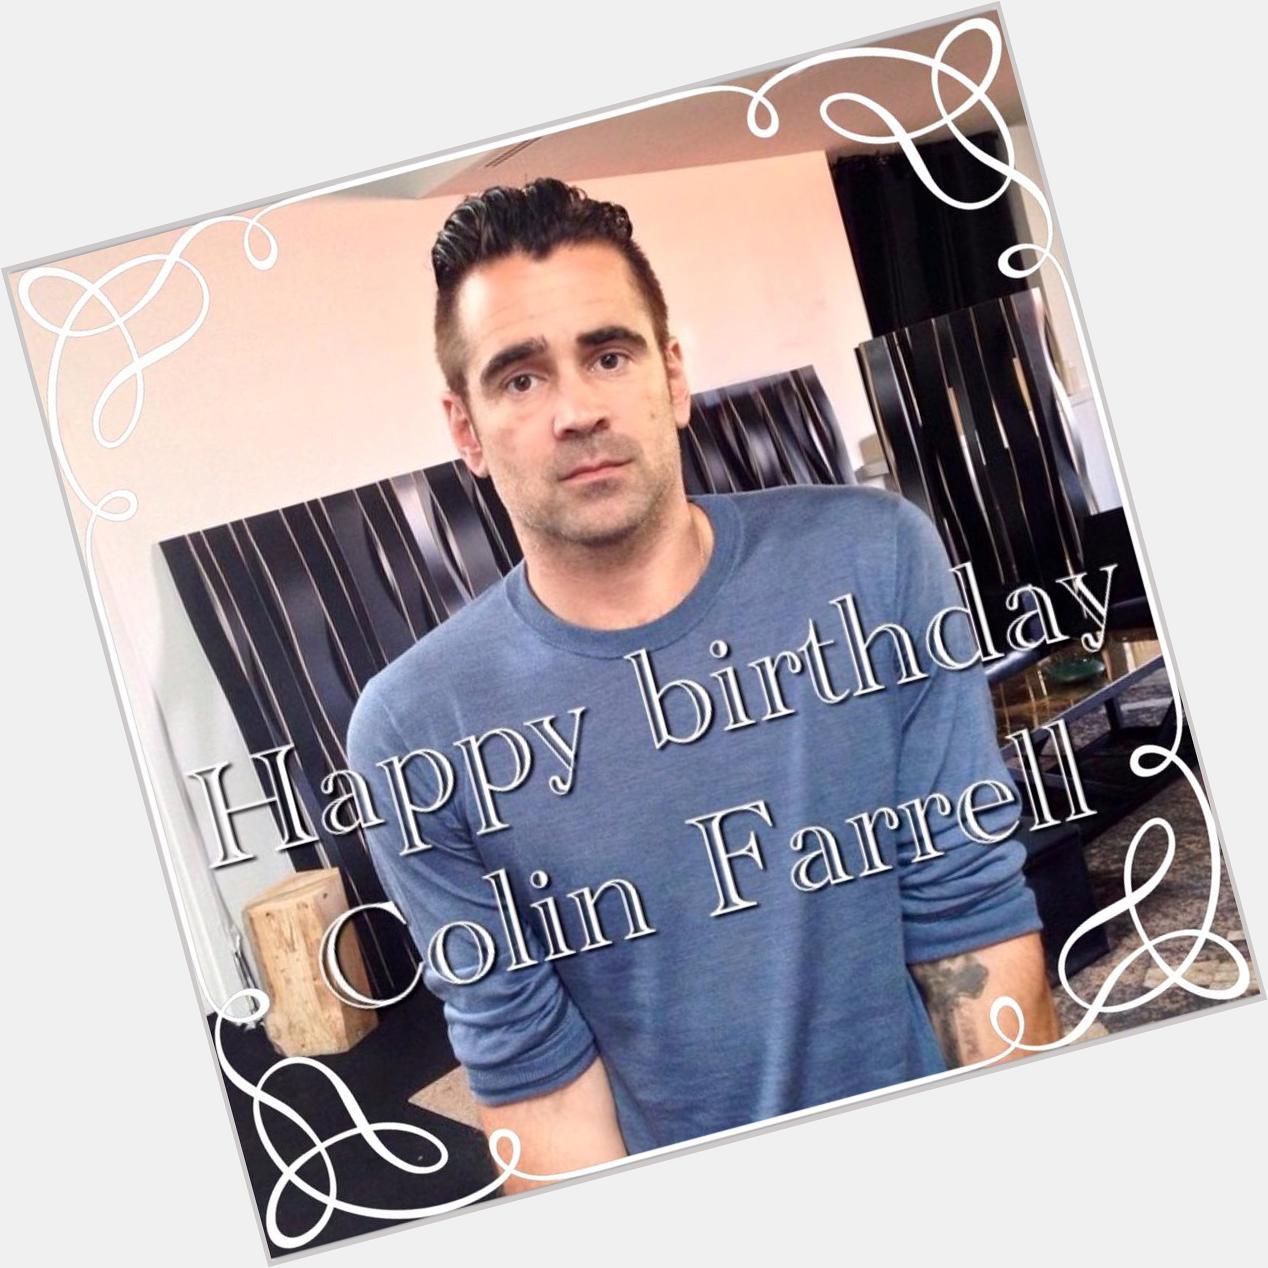 Happy Birthday Colin Farrell, we wish you a wonderful day with your family and friends. 